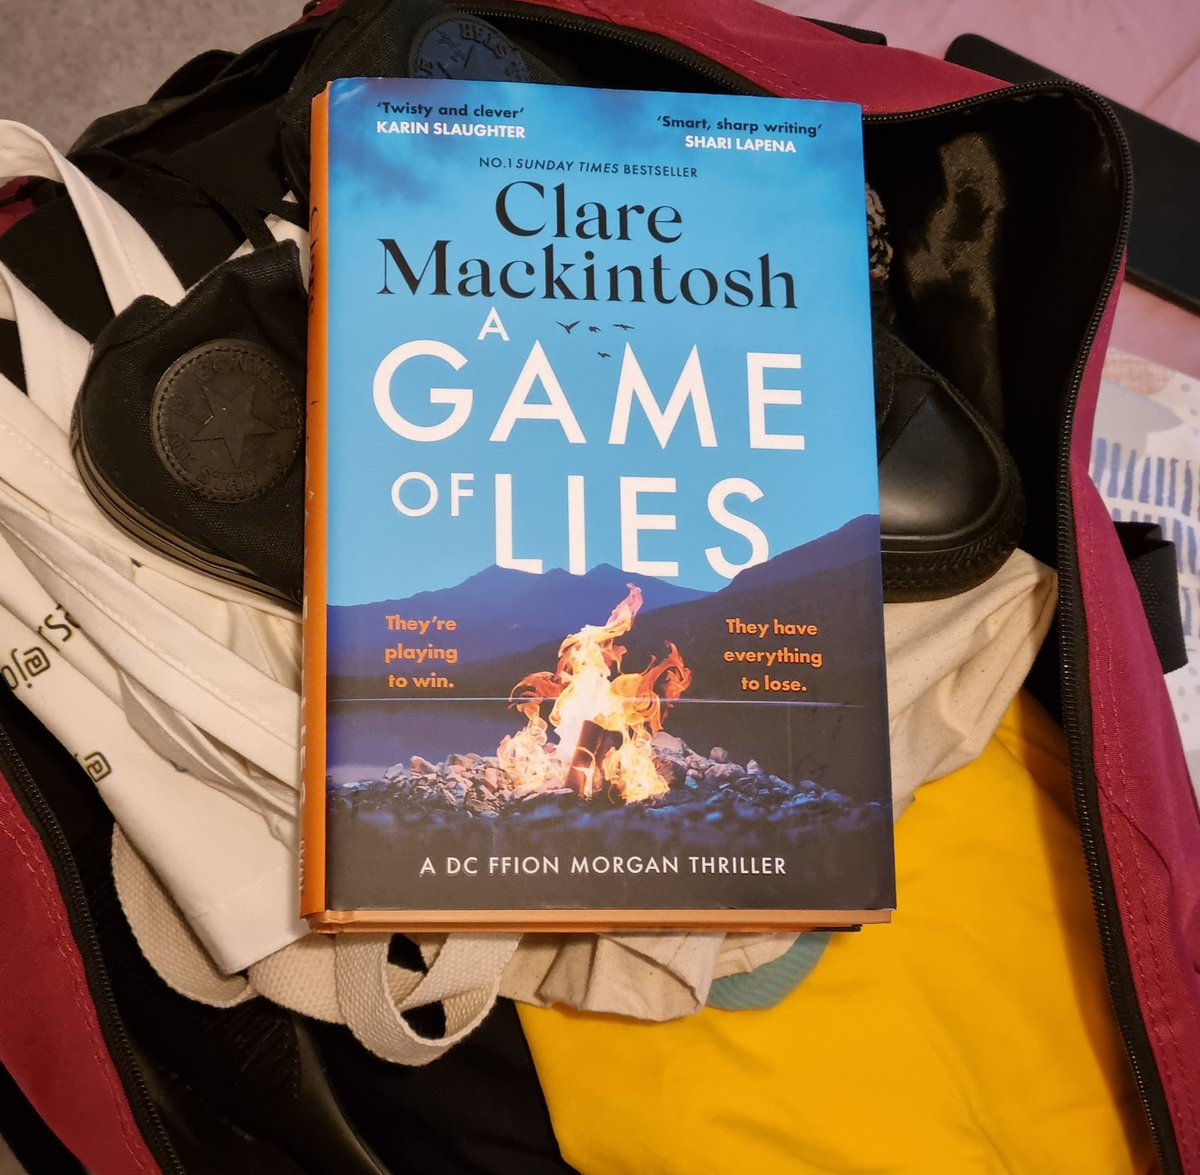 Packing essential for #TheakstonsCrime 
@claremackint0sh new book A Game of Lies.

Now, let the games begin @Bookish_Becky #agameoflies